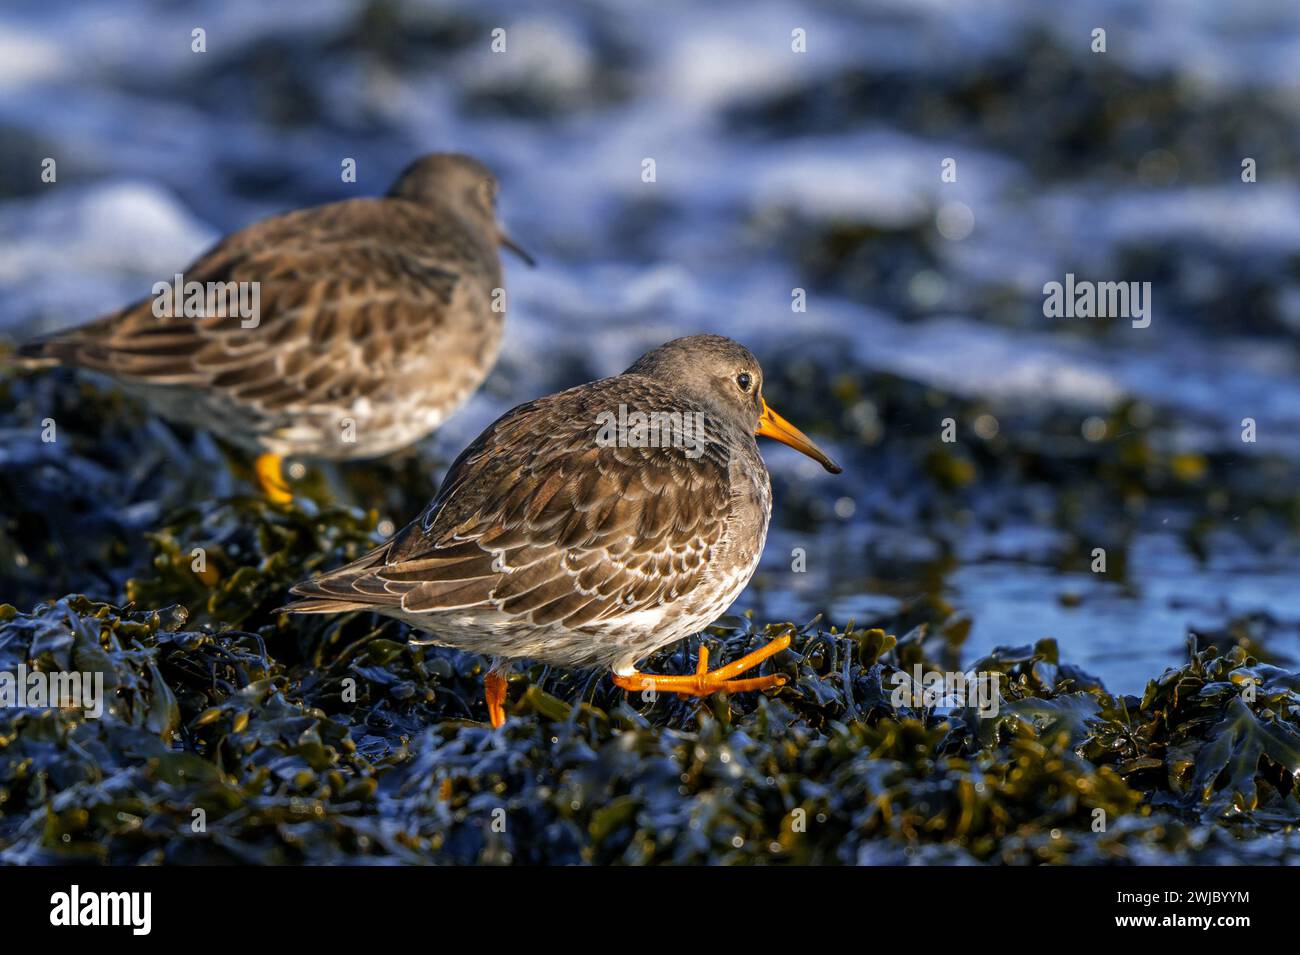 Two purple sandpipers (Calidris maritima) in non-breeding plumage foraging on rocky shore covered in seaweed along the North Sea coast in winter Stock Photo